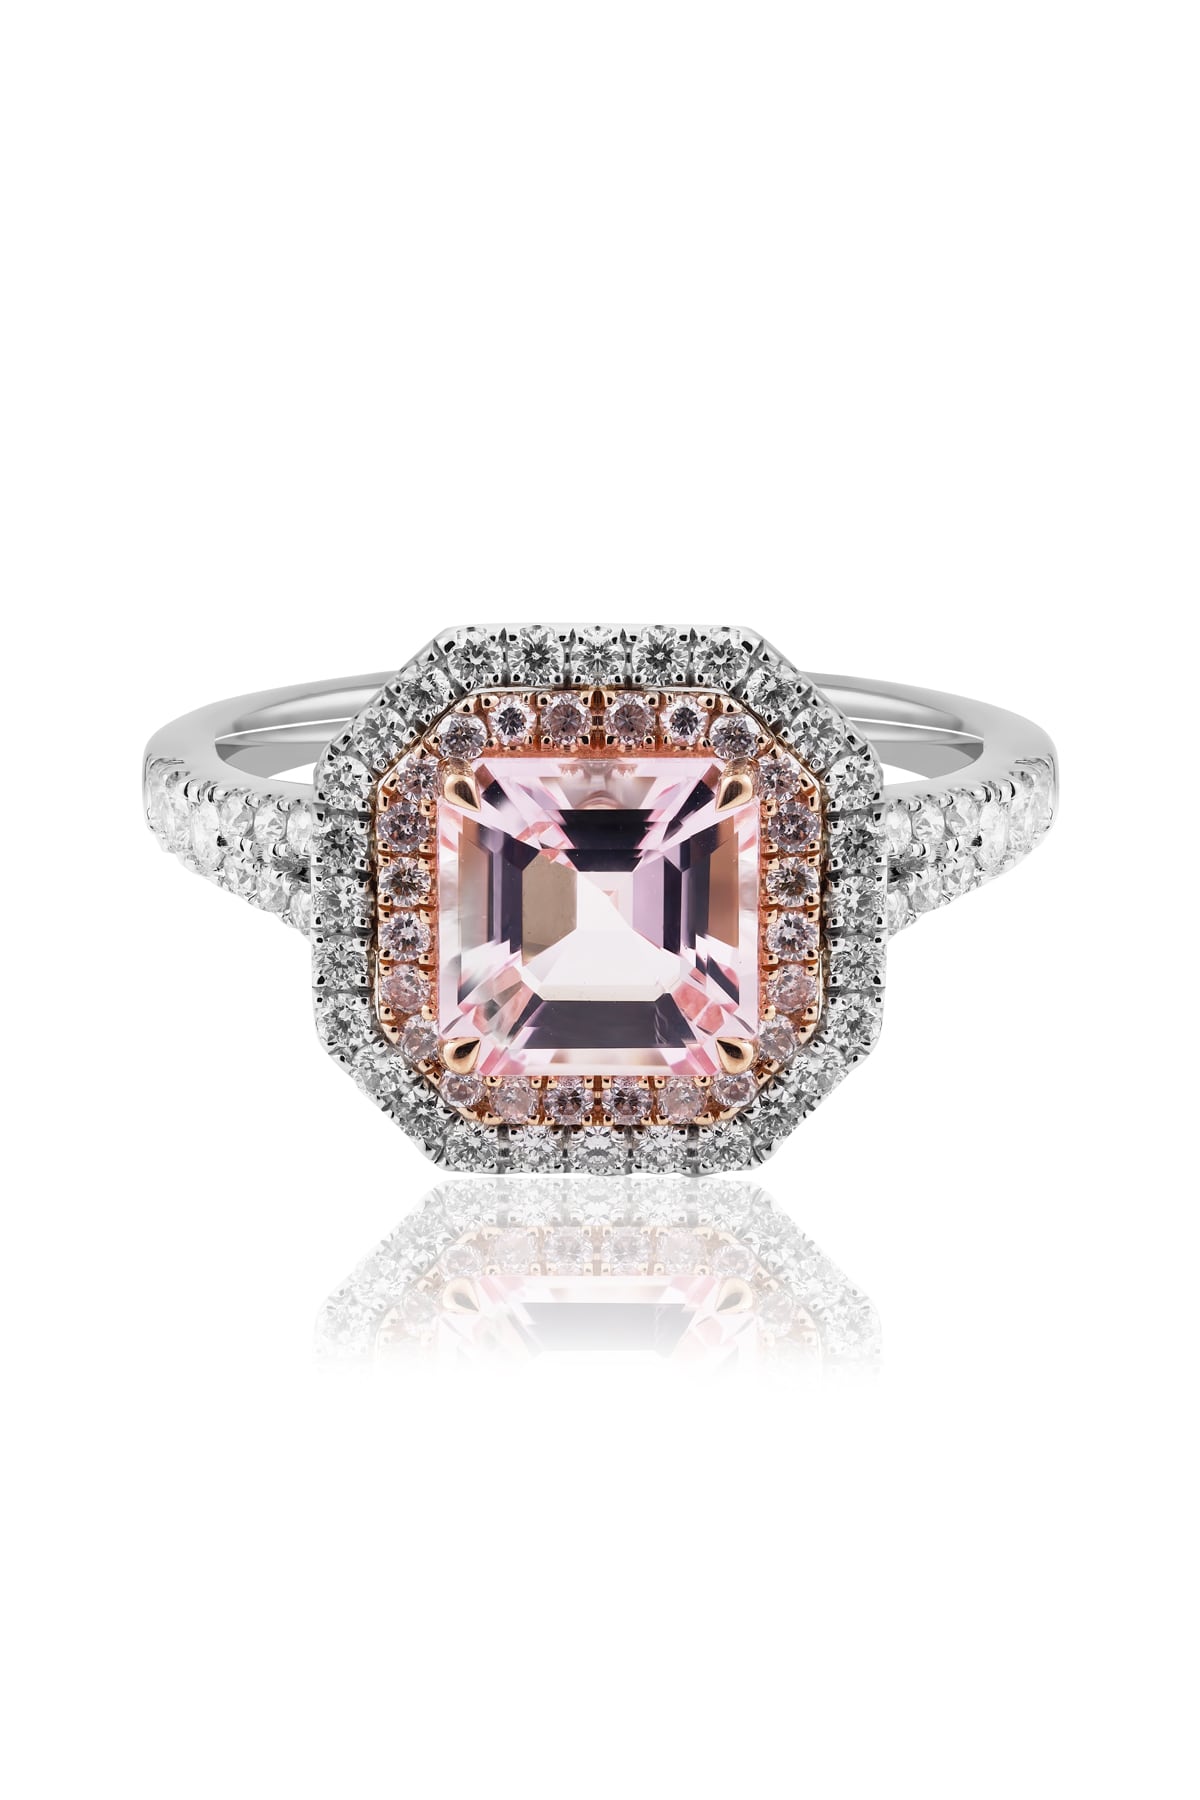 Square Asscher Cut Pink Morganite & Diamond Halo Ring from LeGassick.